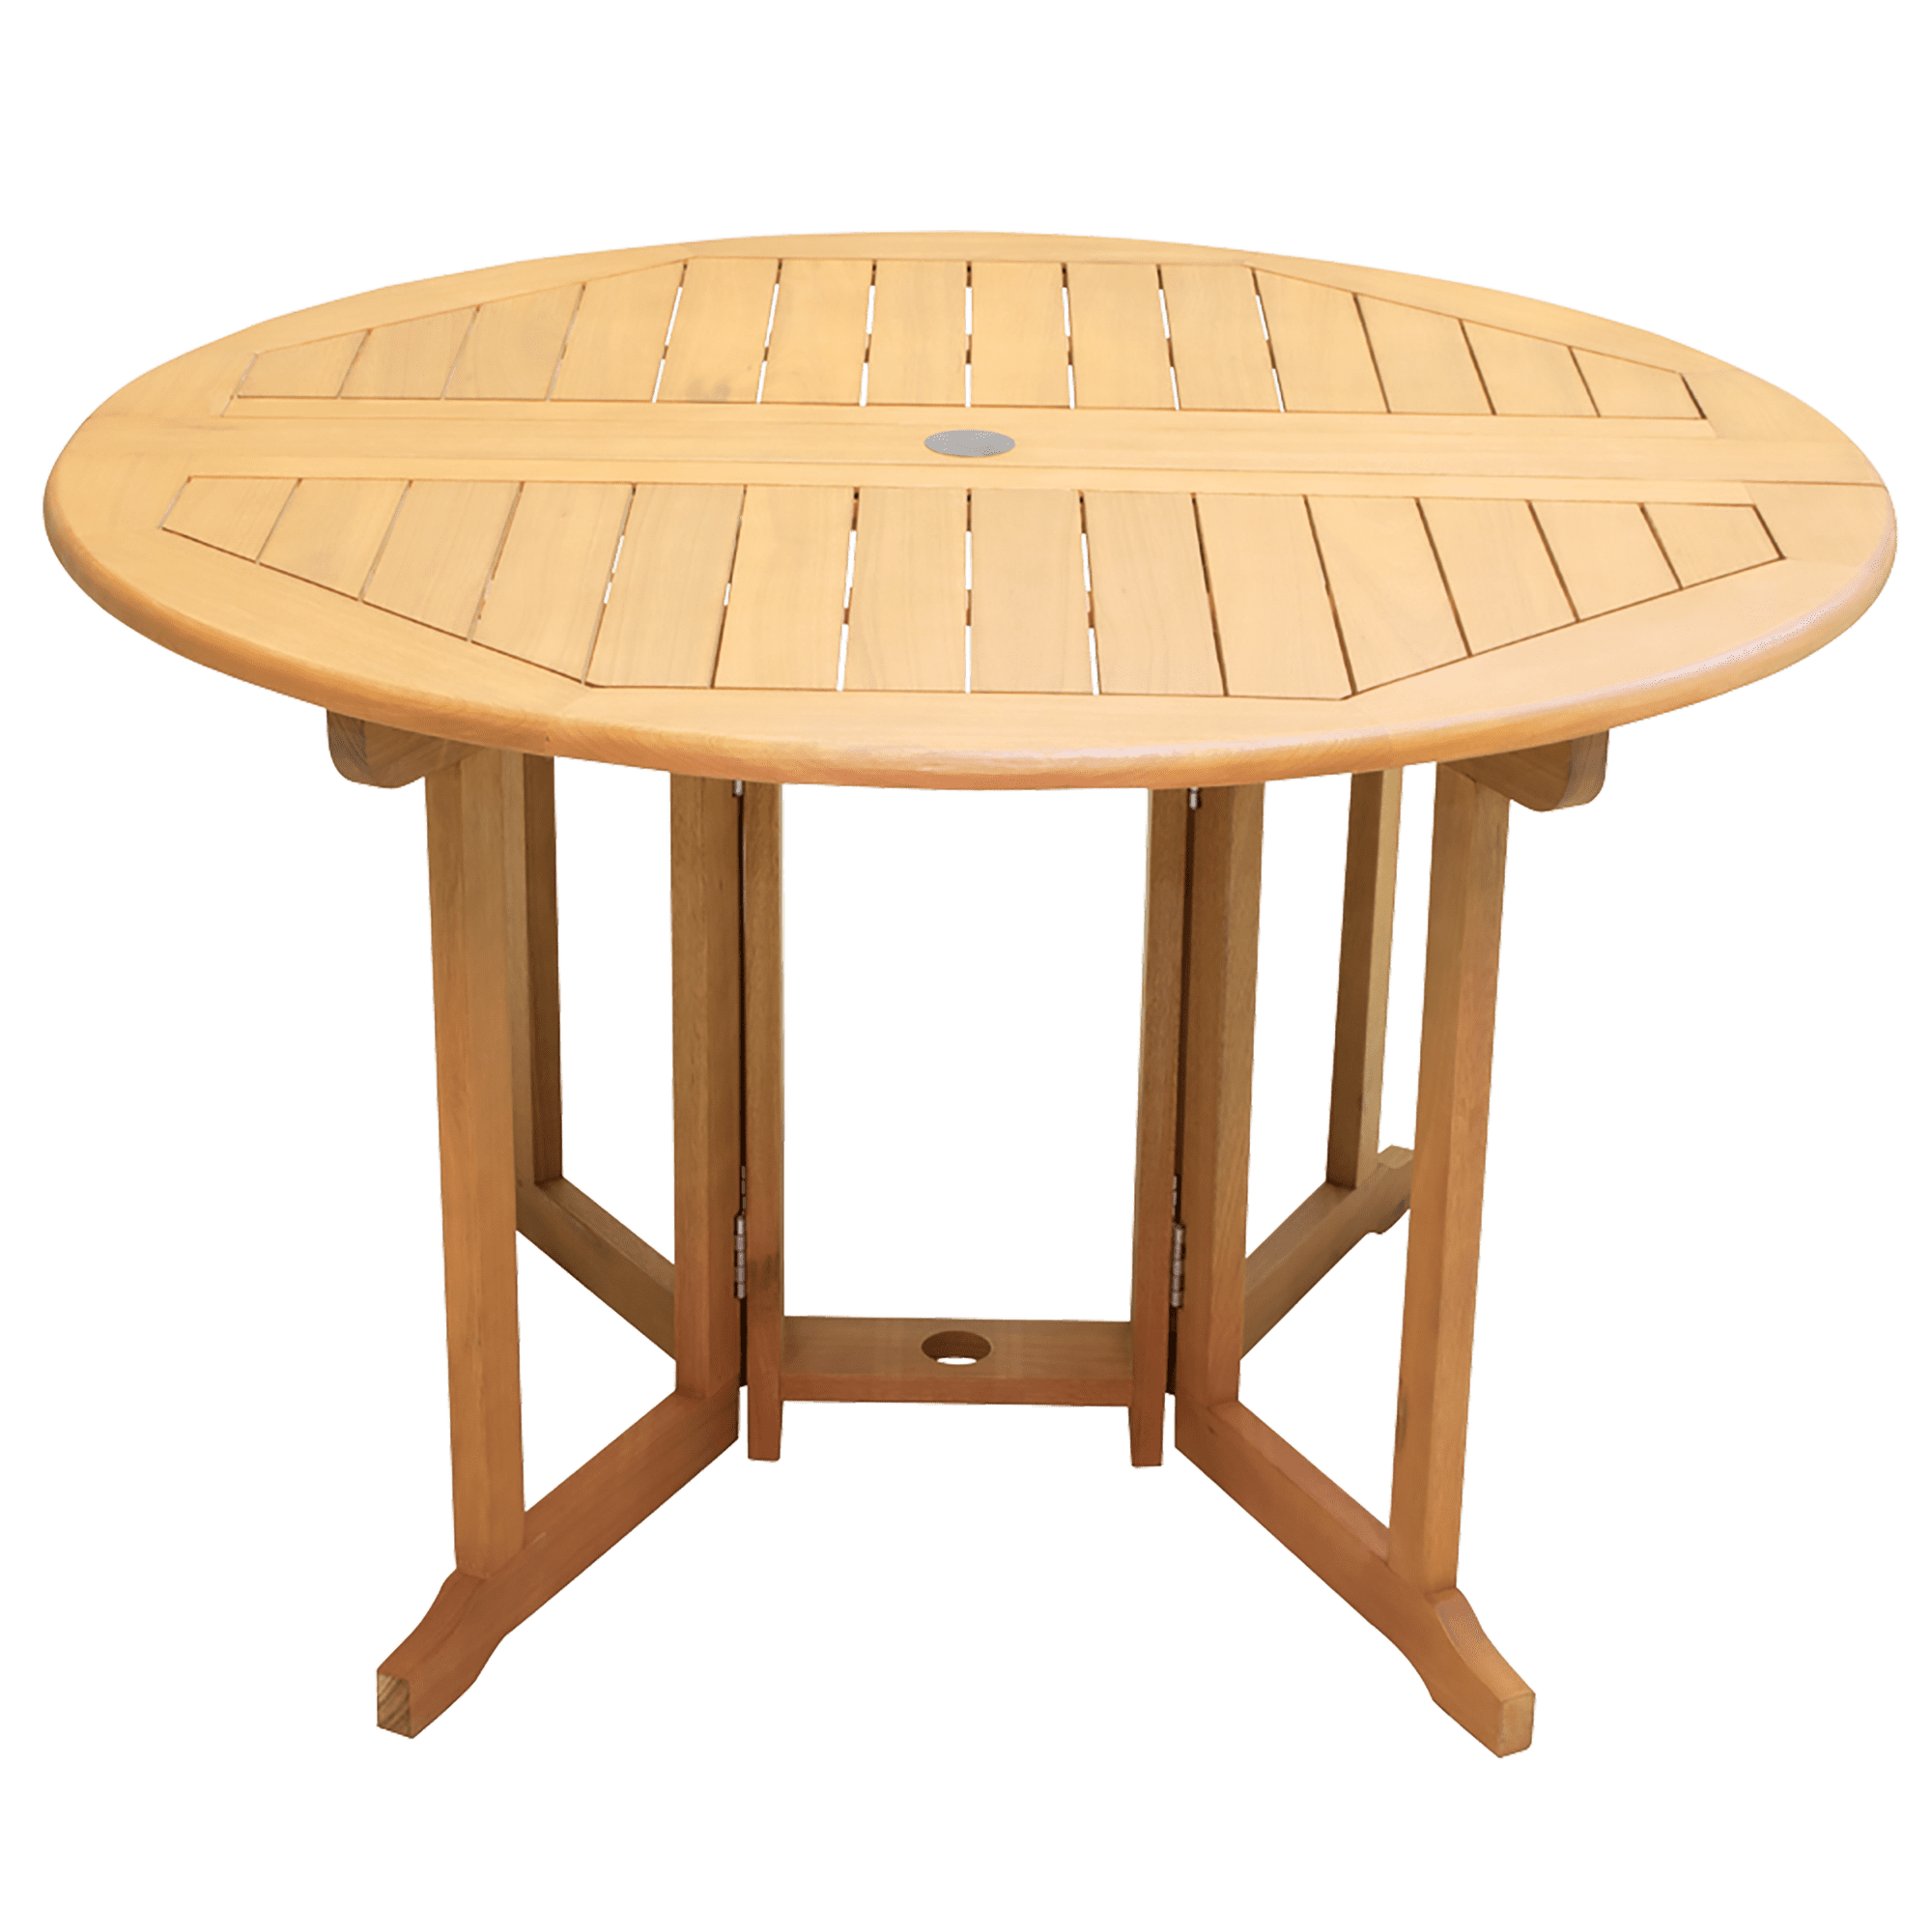 Rio Innovations Newport Wood Round Gateway Folding Patio Dining Table